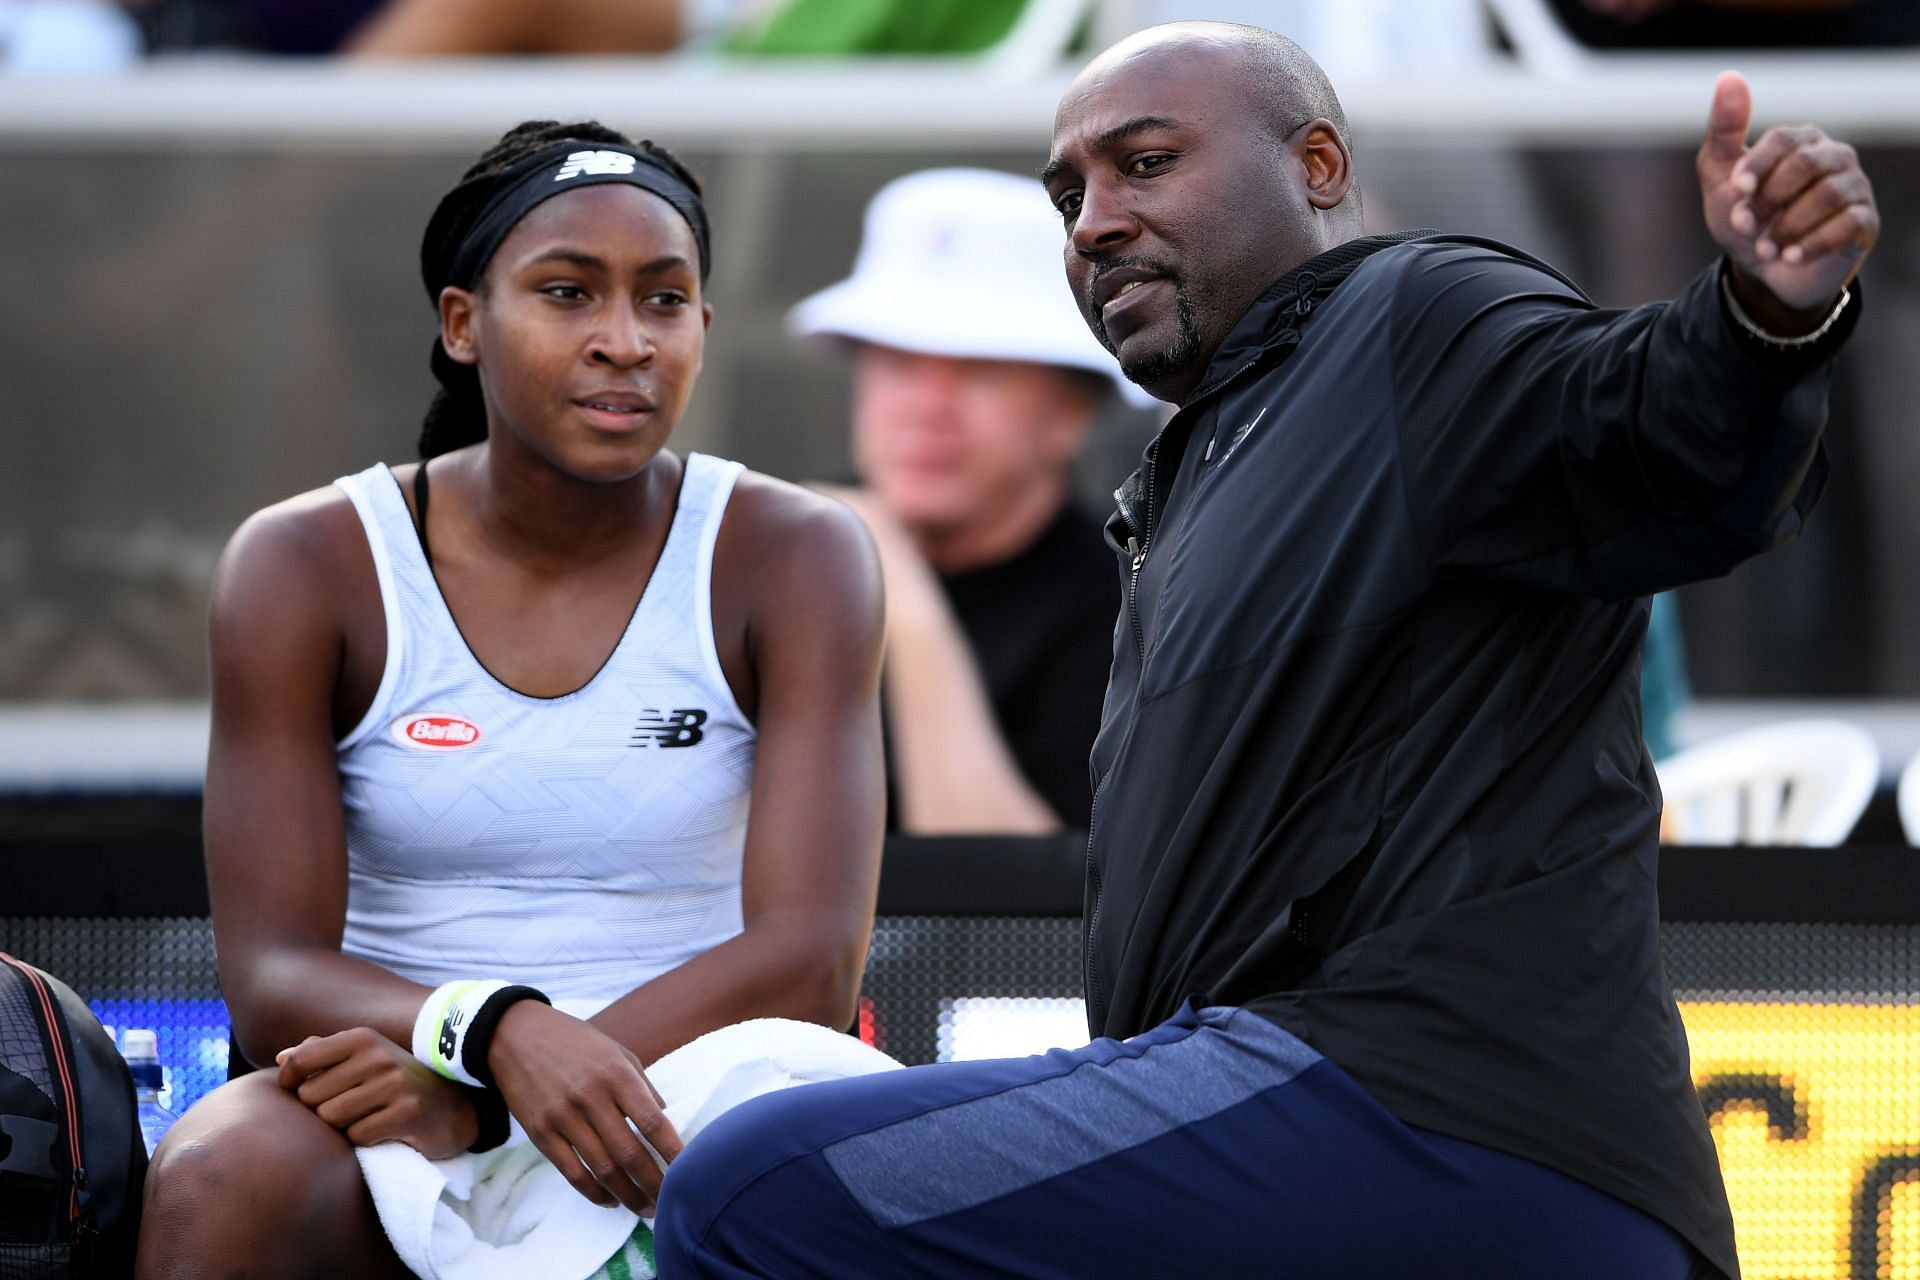 Coco Gauff being advised by her father